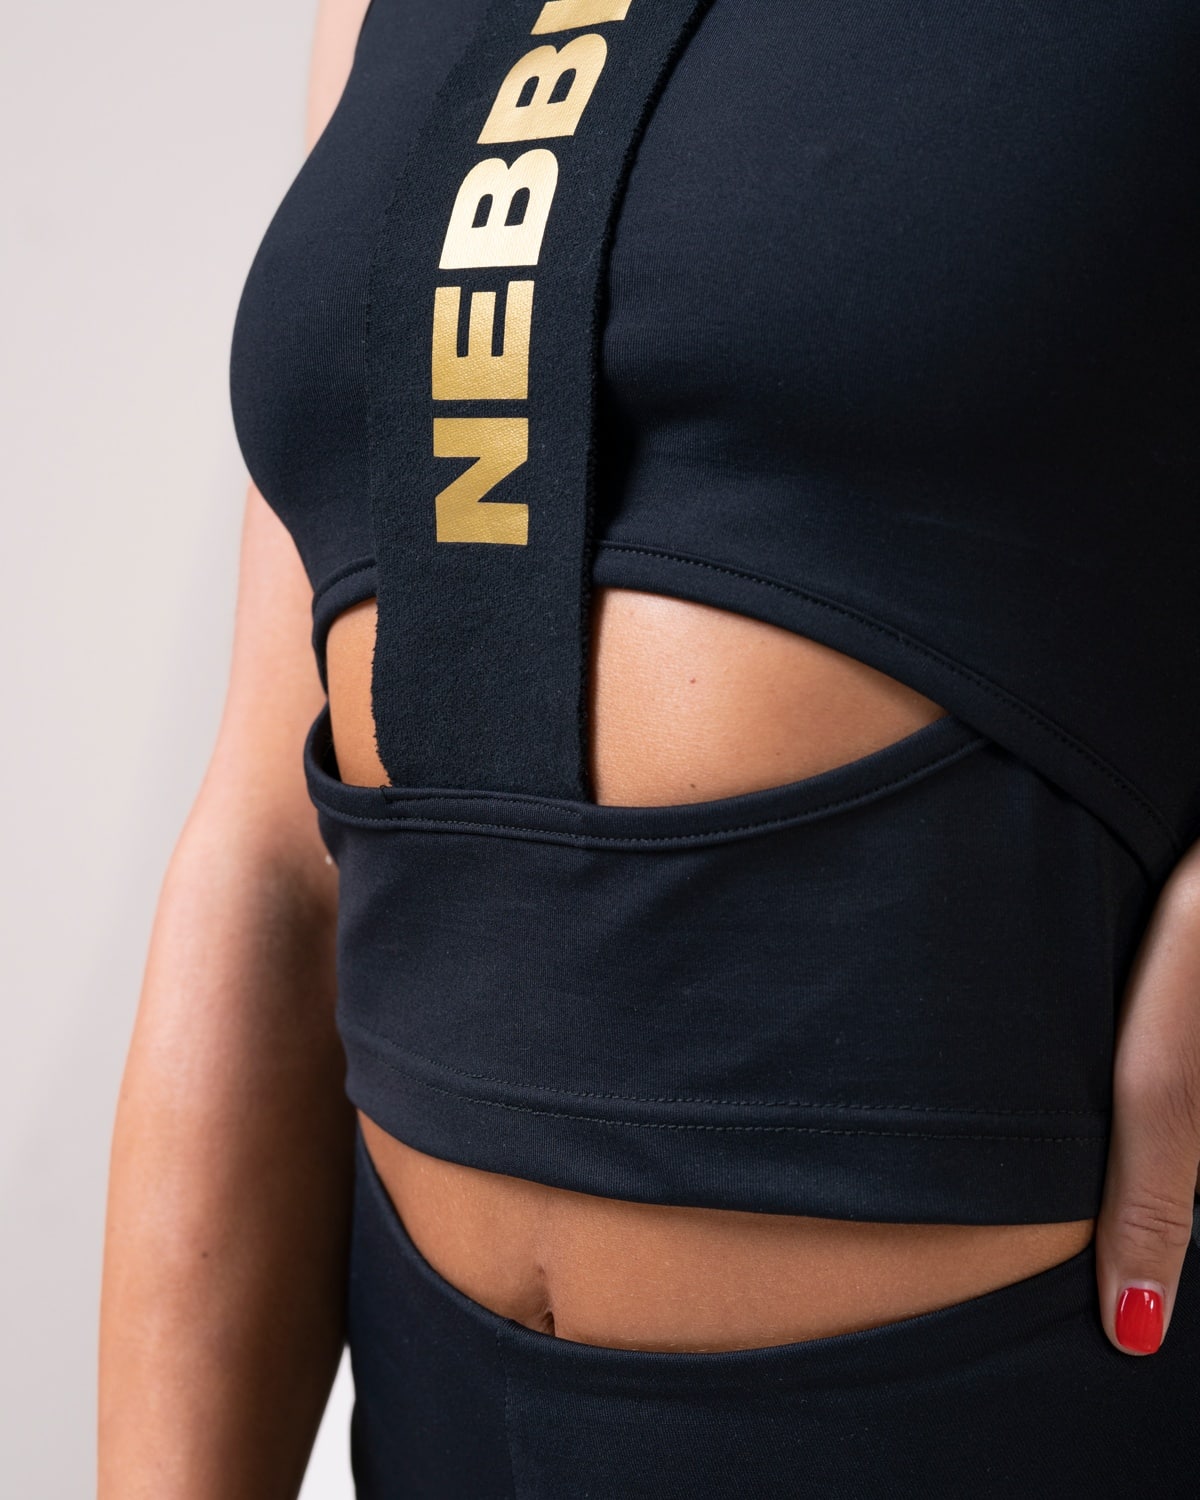 Nebbia Cyprus - At NEBBIA, we believe that being fit is incredibly sexy.  The Honey Bunny collection was created to always make you feel that way.  NEW HONEY BUNNY COLLECTION ✨🖤✨💛✨ #nebbiacyprus #